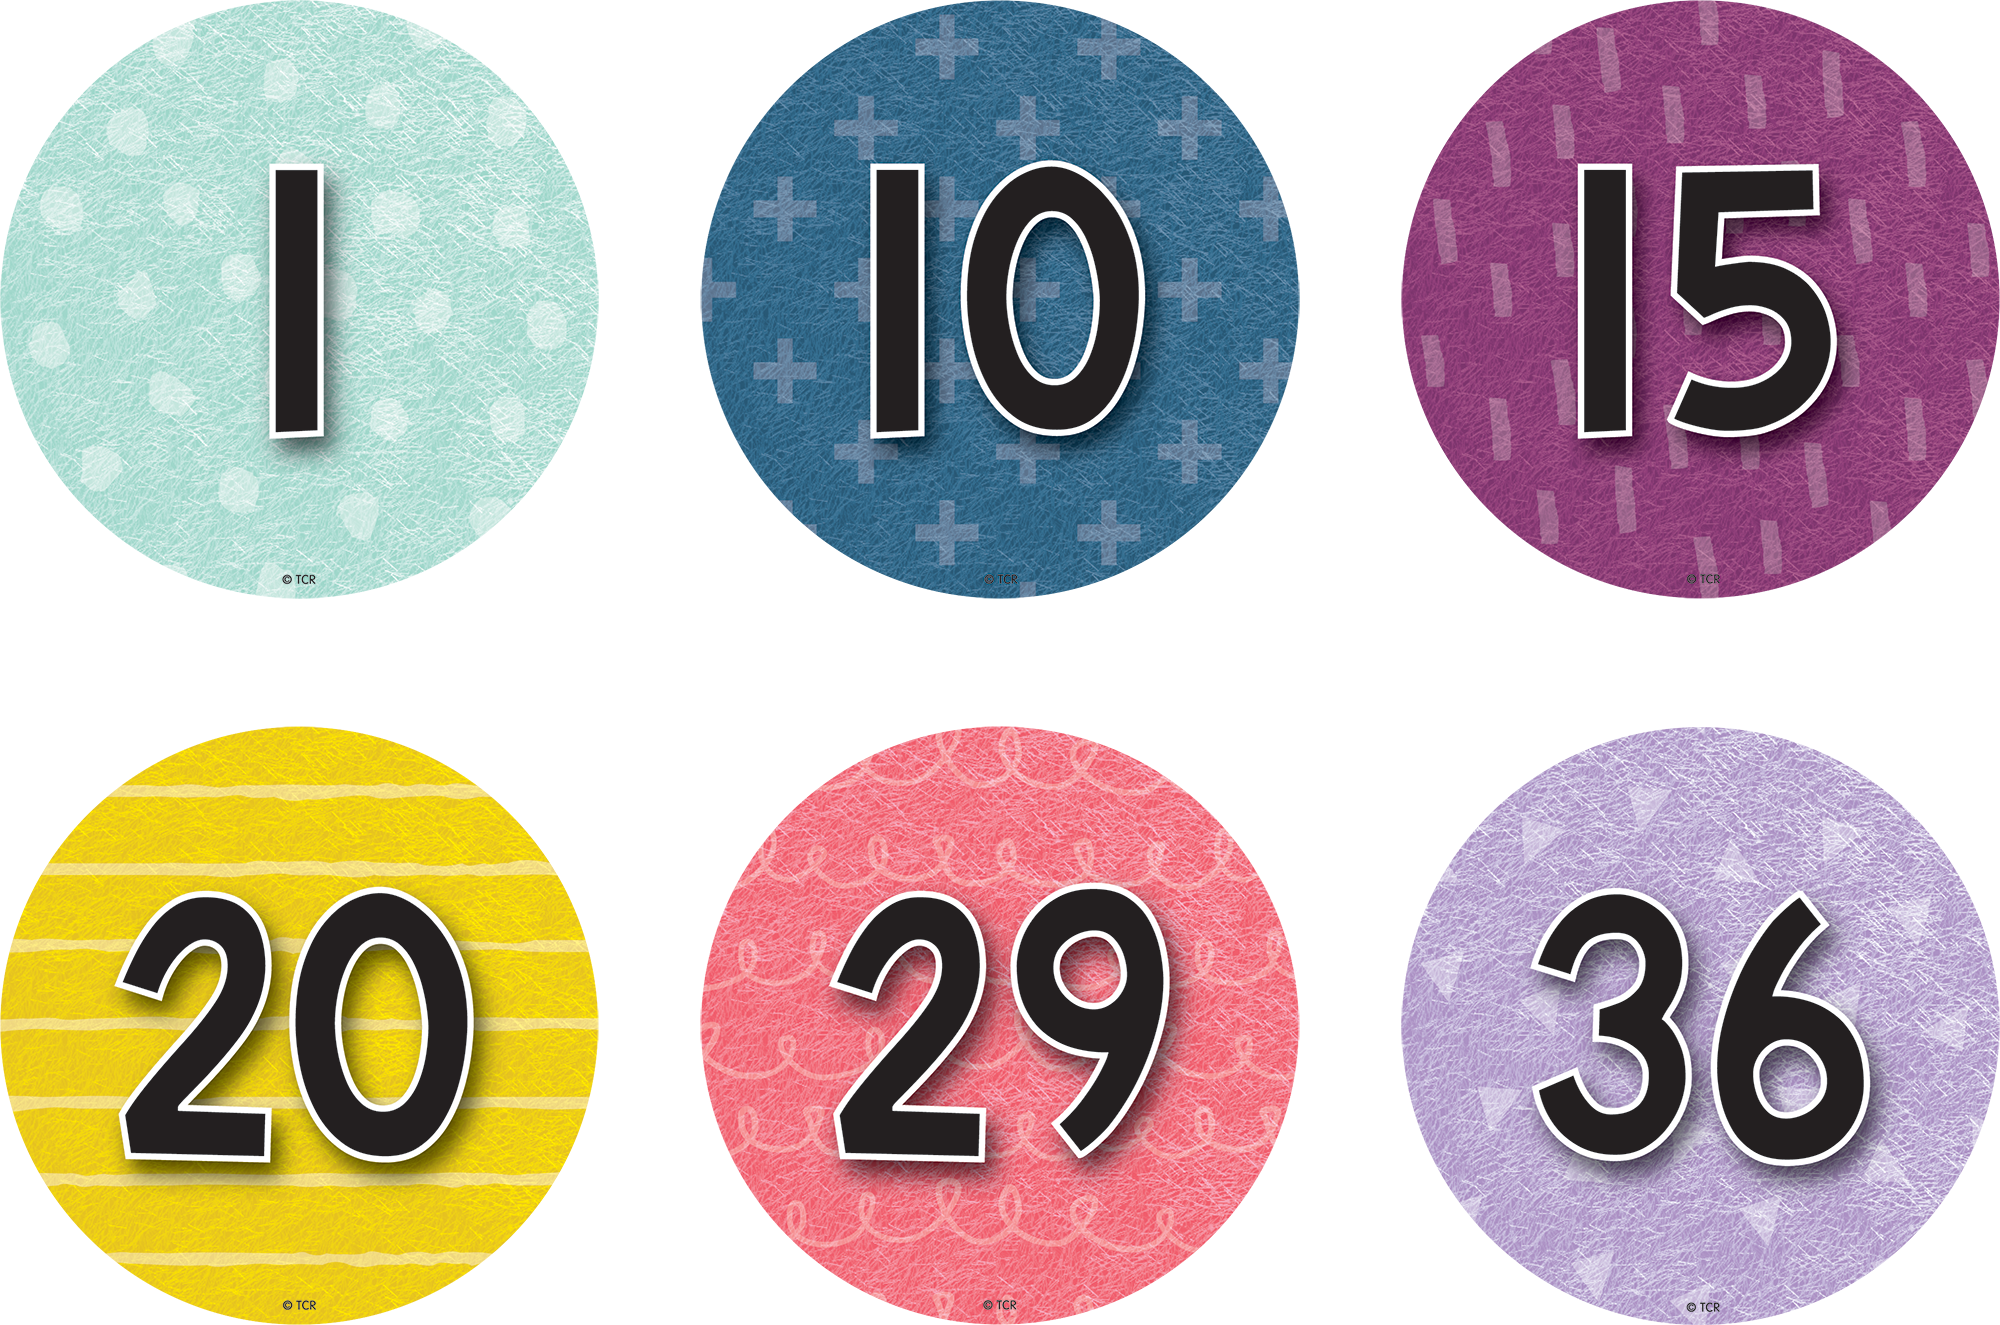 The floor markers attach firmly to vinyl, wood, smooth tile, gym floors, or other smooth surfaces. The write-on/wipe-off surface is perfect for writing student names or numbers.